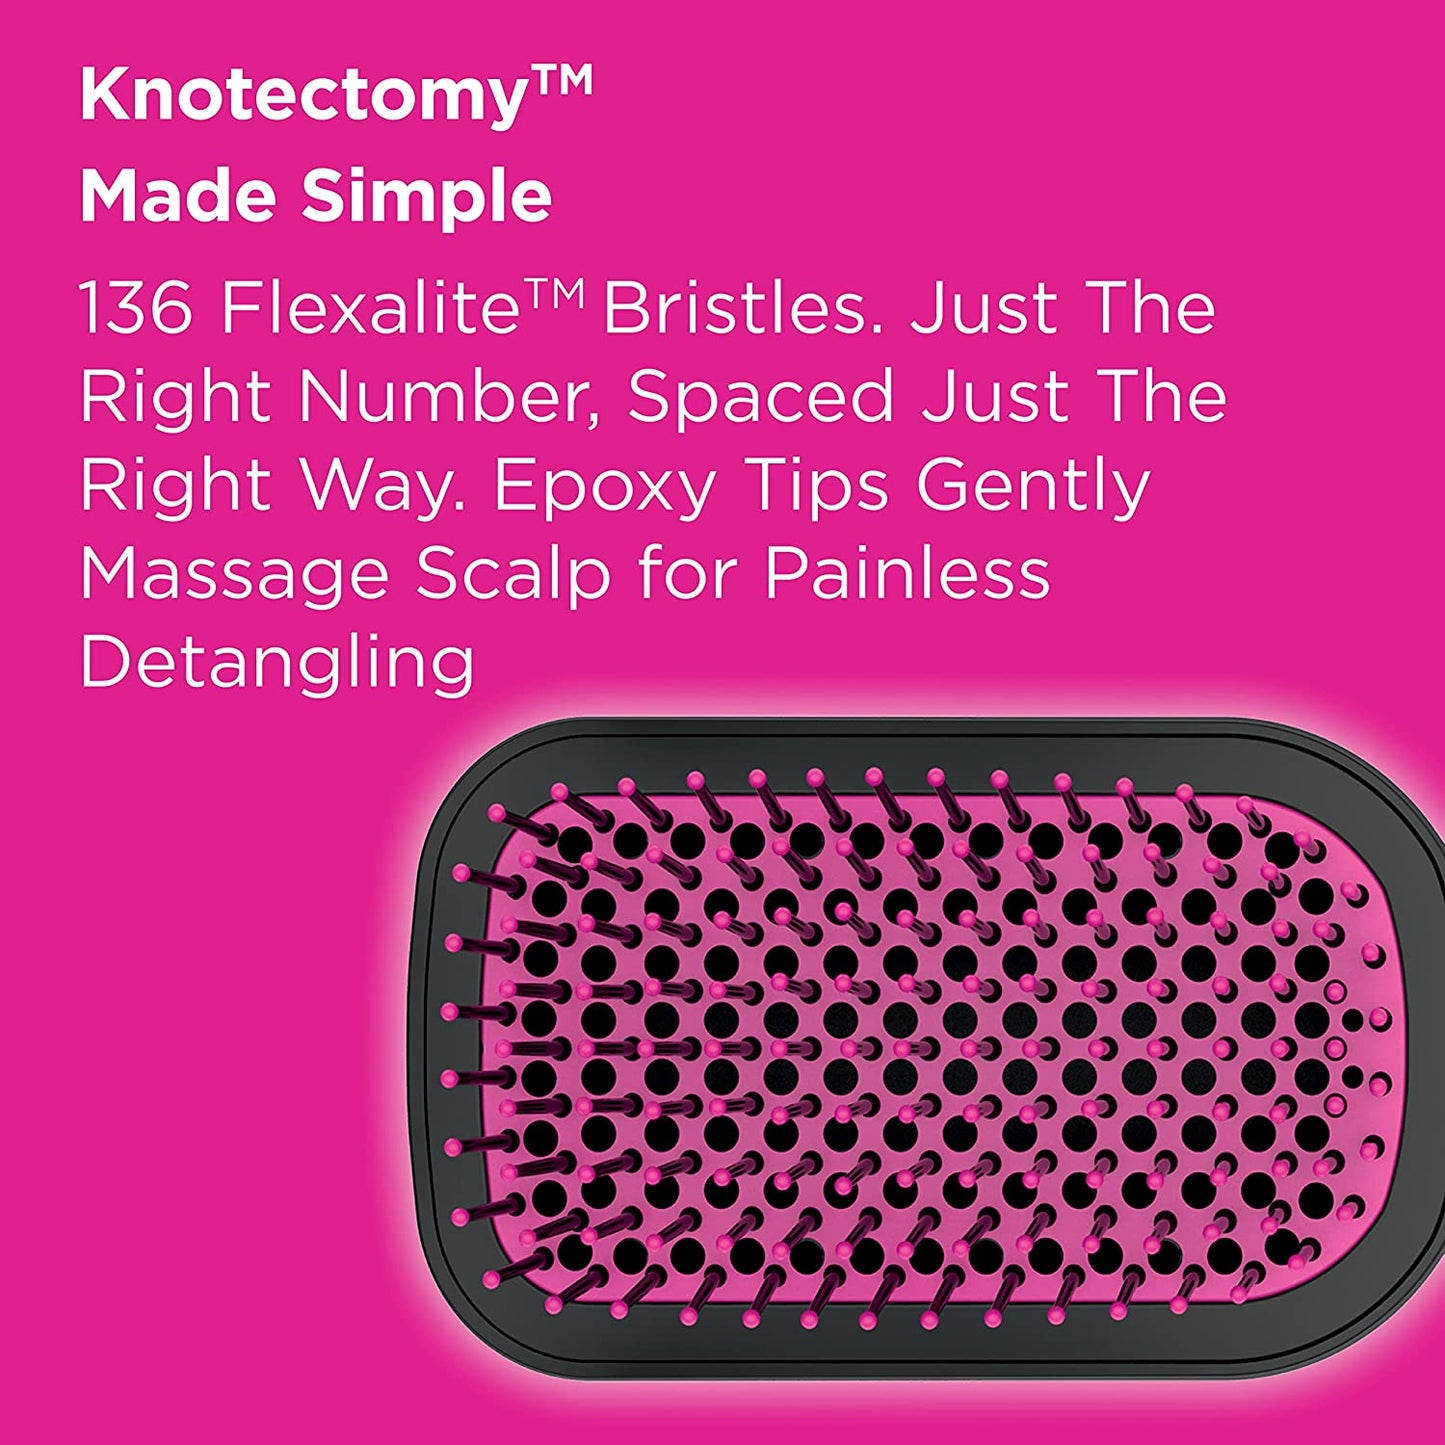 The Knot Dr. Conair BC120C All-in-1 Smoothing Detangling Dryer Brush Pink | GreenLifeHuman Emporium